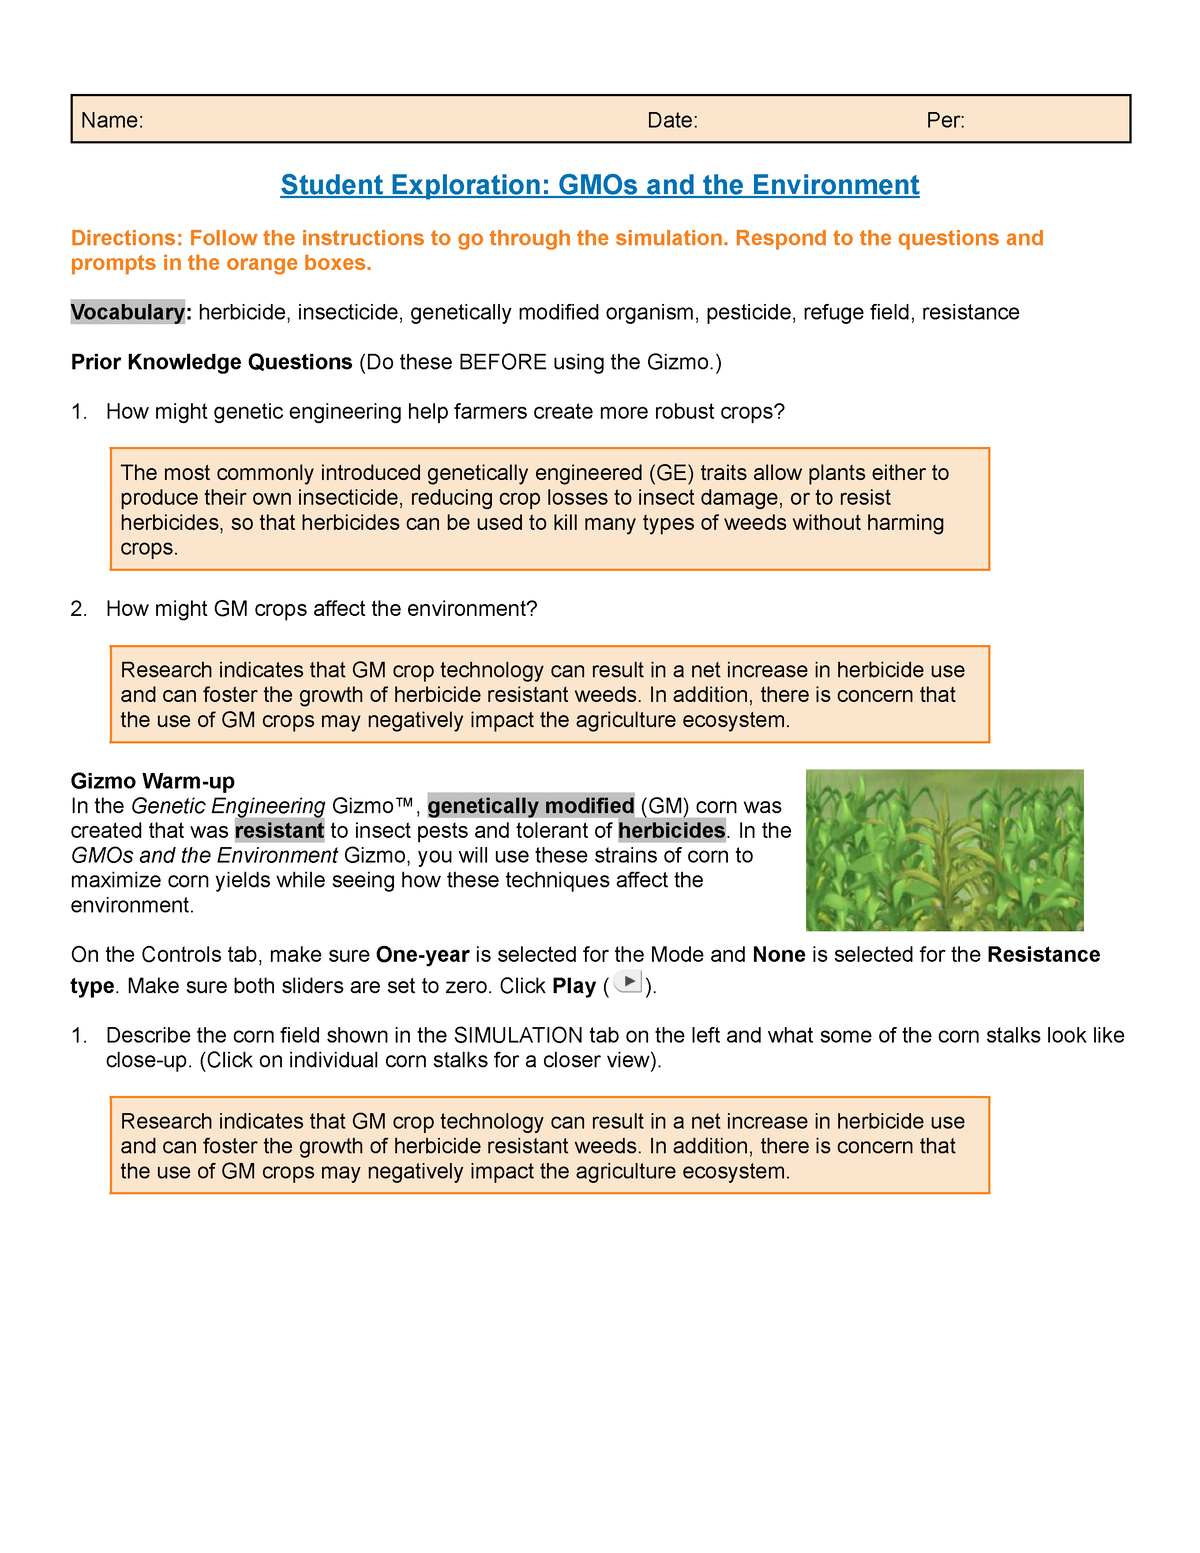 GMOs and the Environment Gizmo - Name: Date: Per: Student Exploration